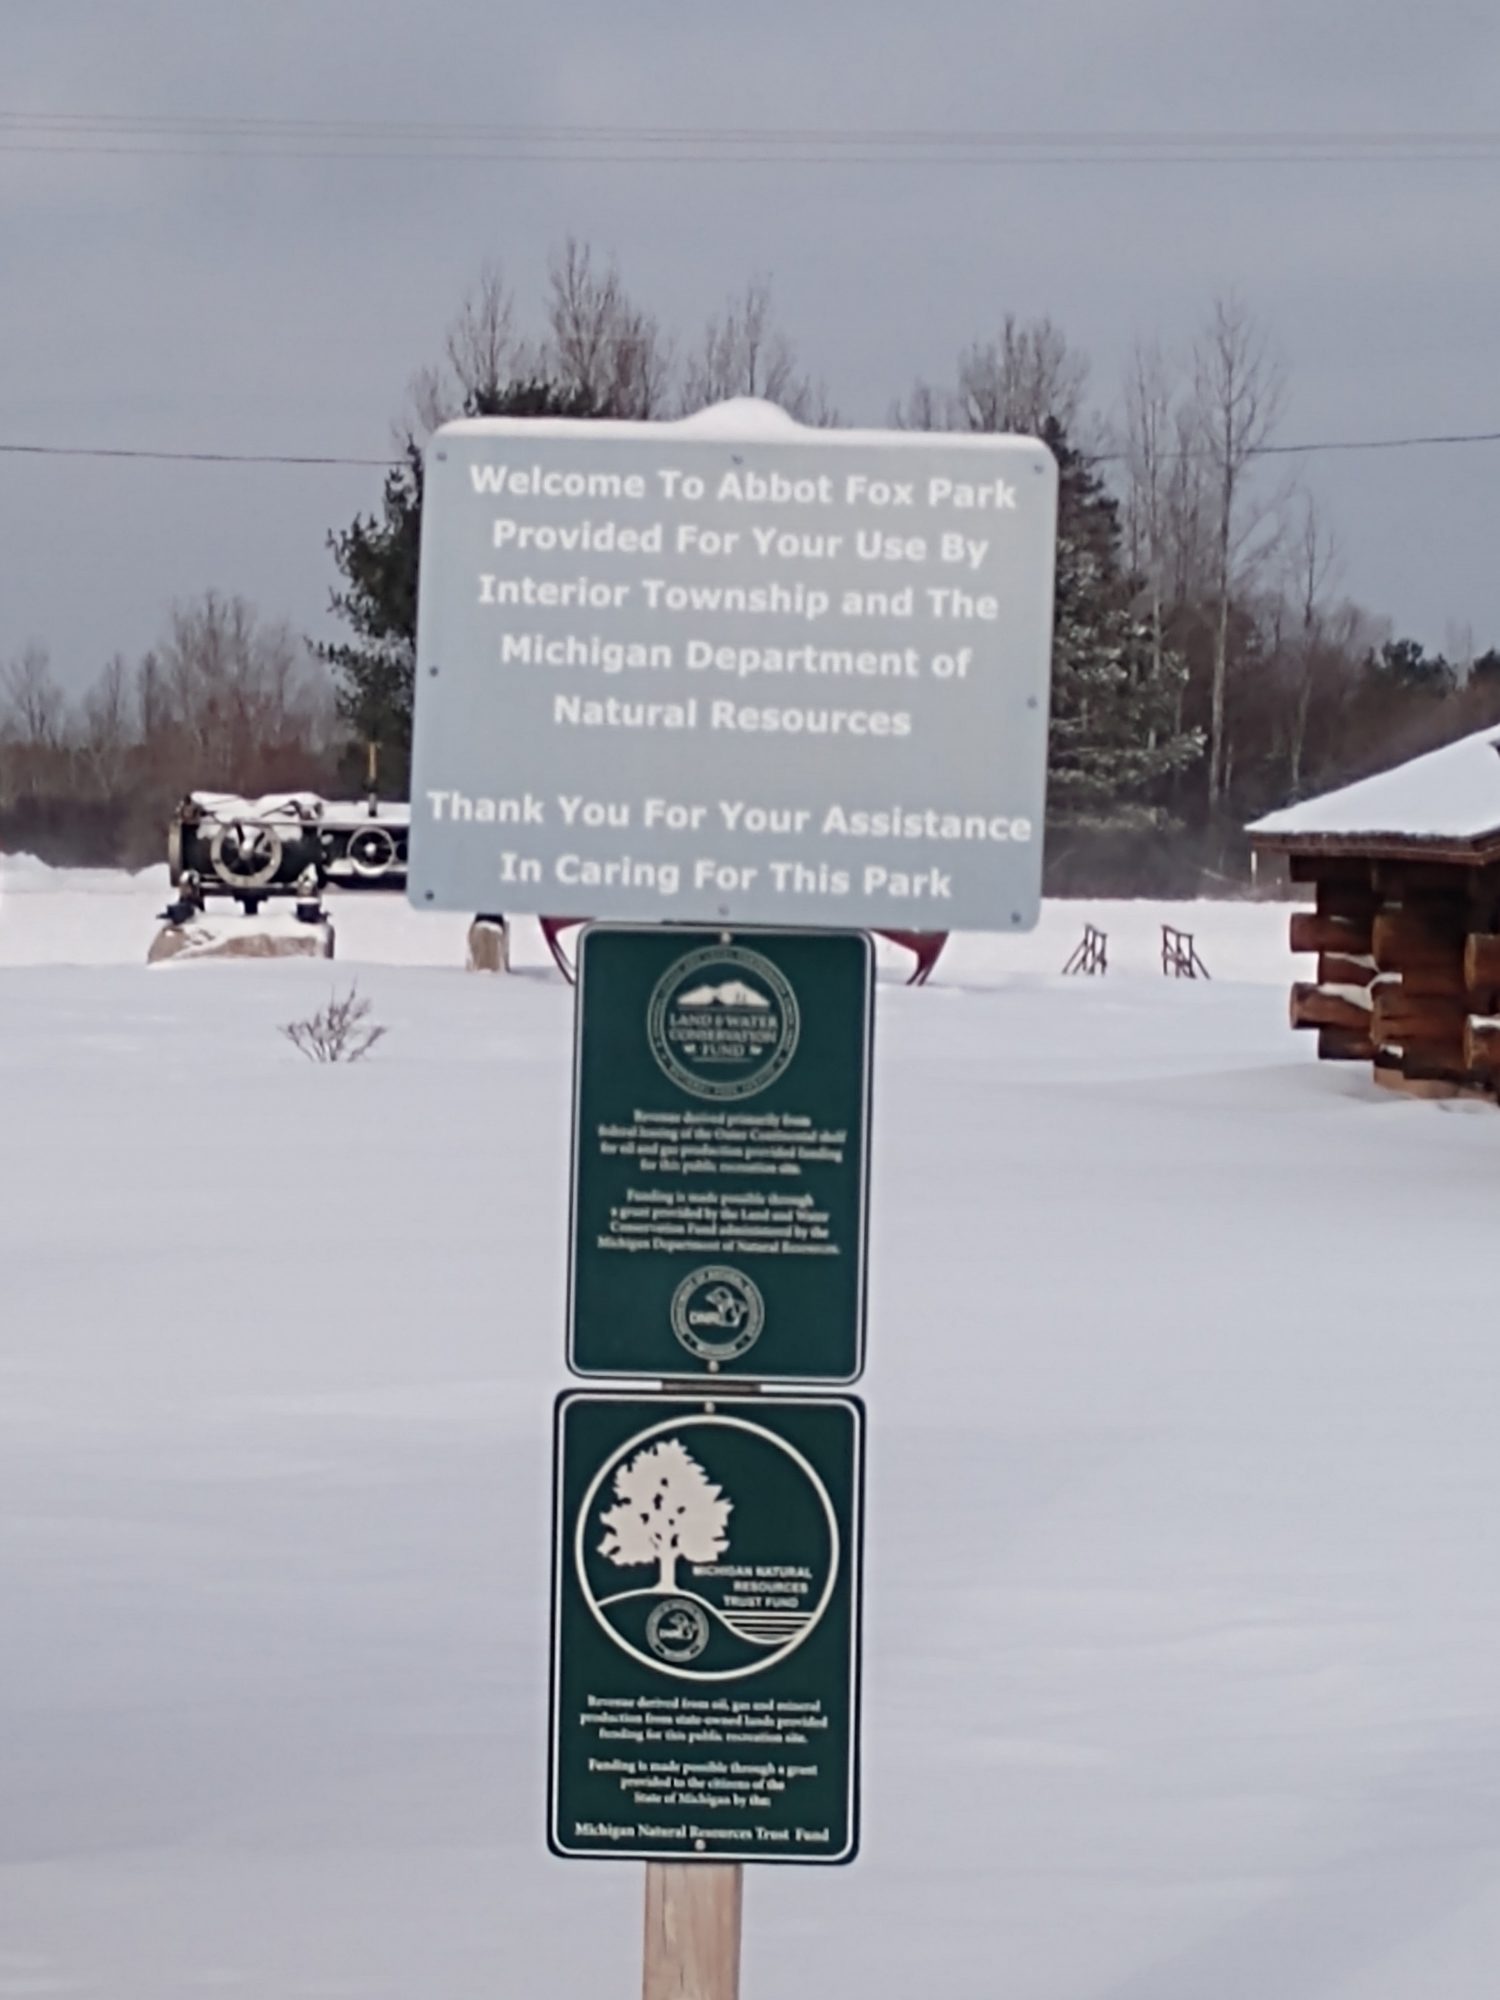 Signpost at Abbot Fox Park in snowy landscape.